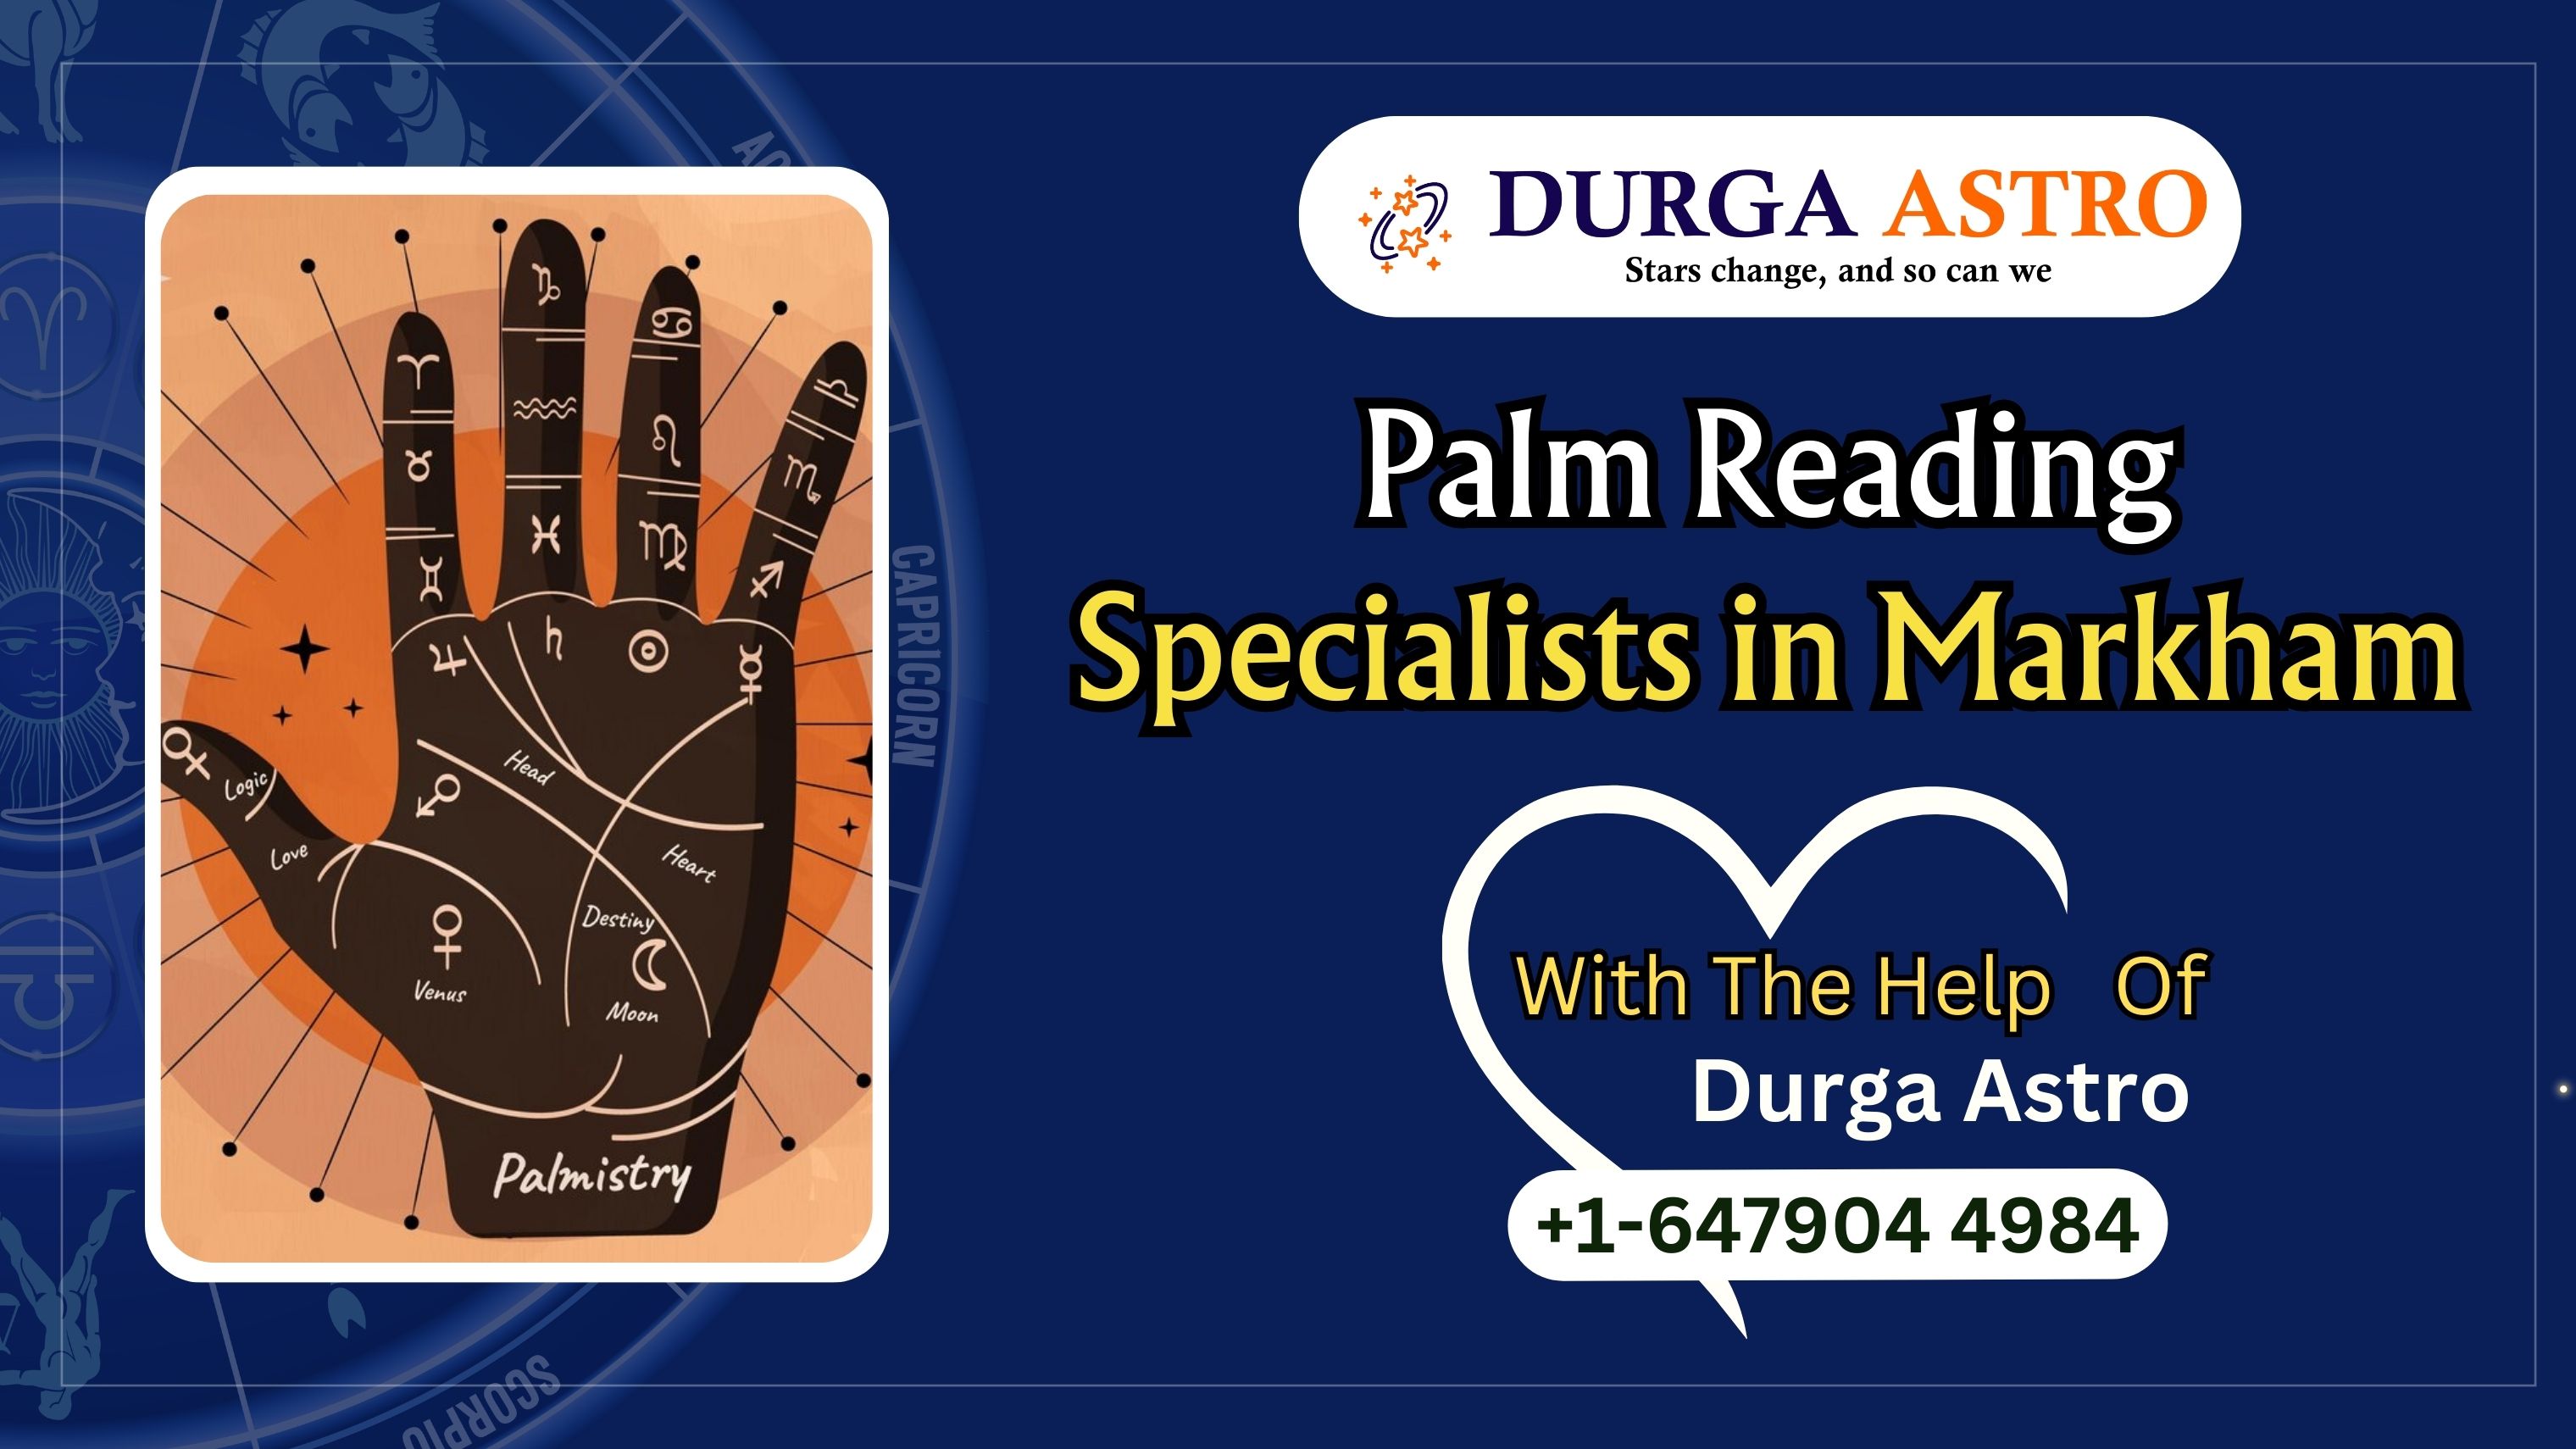 Palm Reading Specialists in Markham